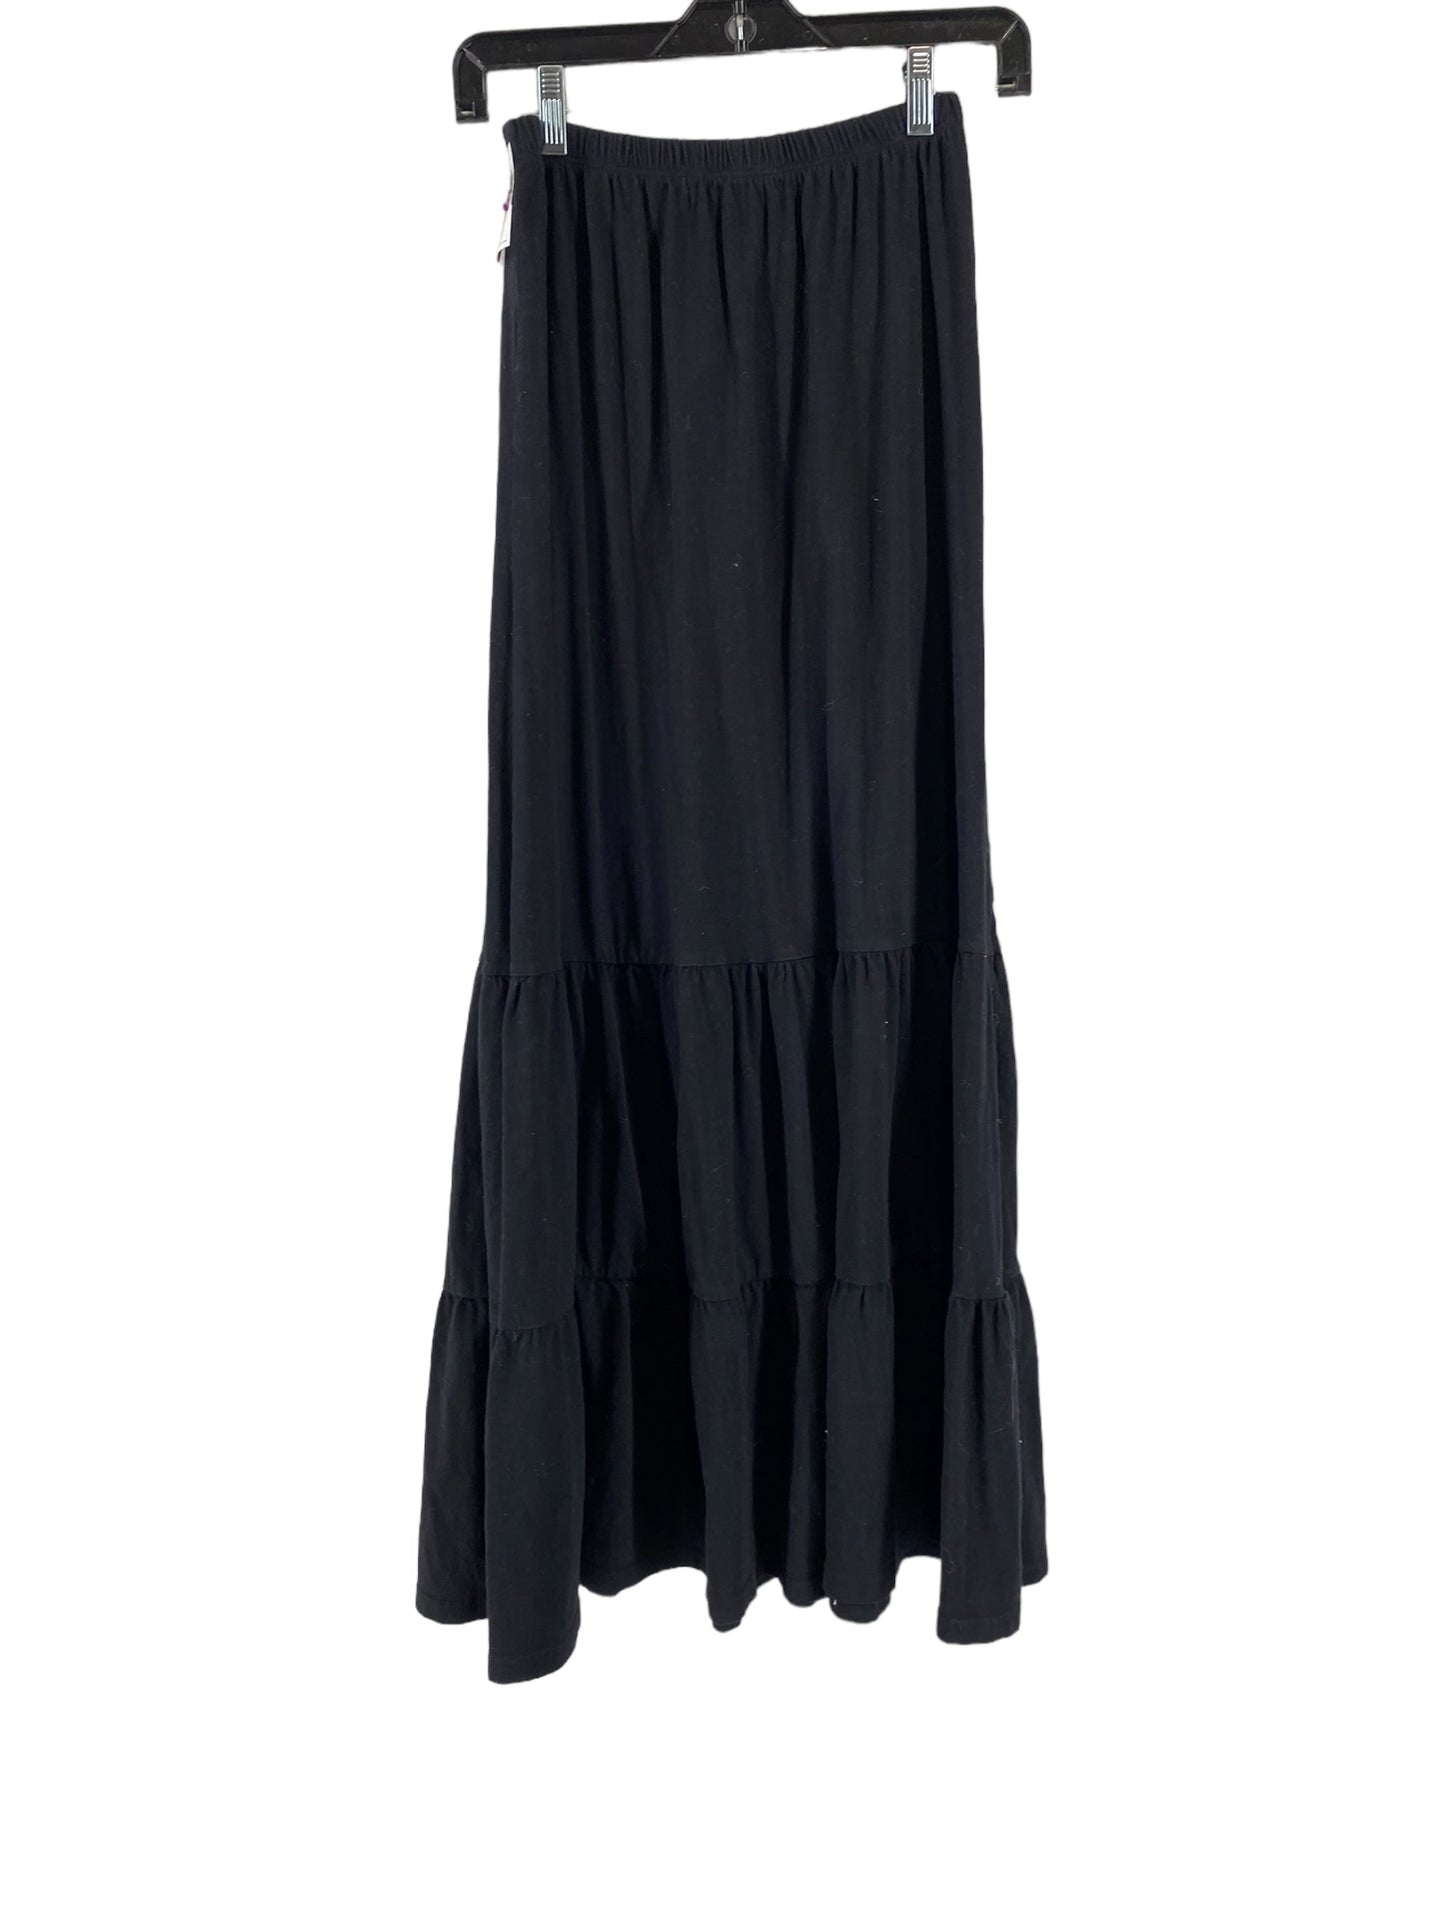 Skirt Maxi By Sundry  Size: 0